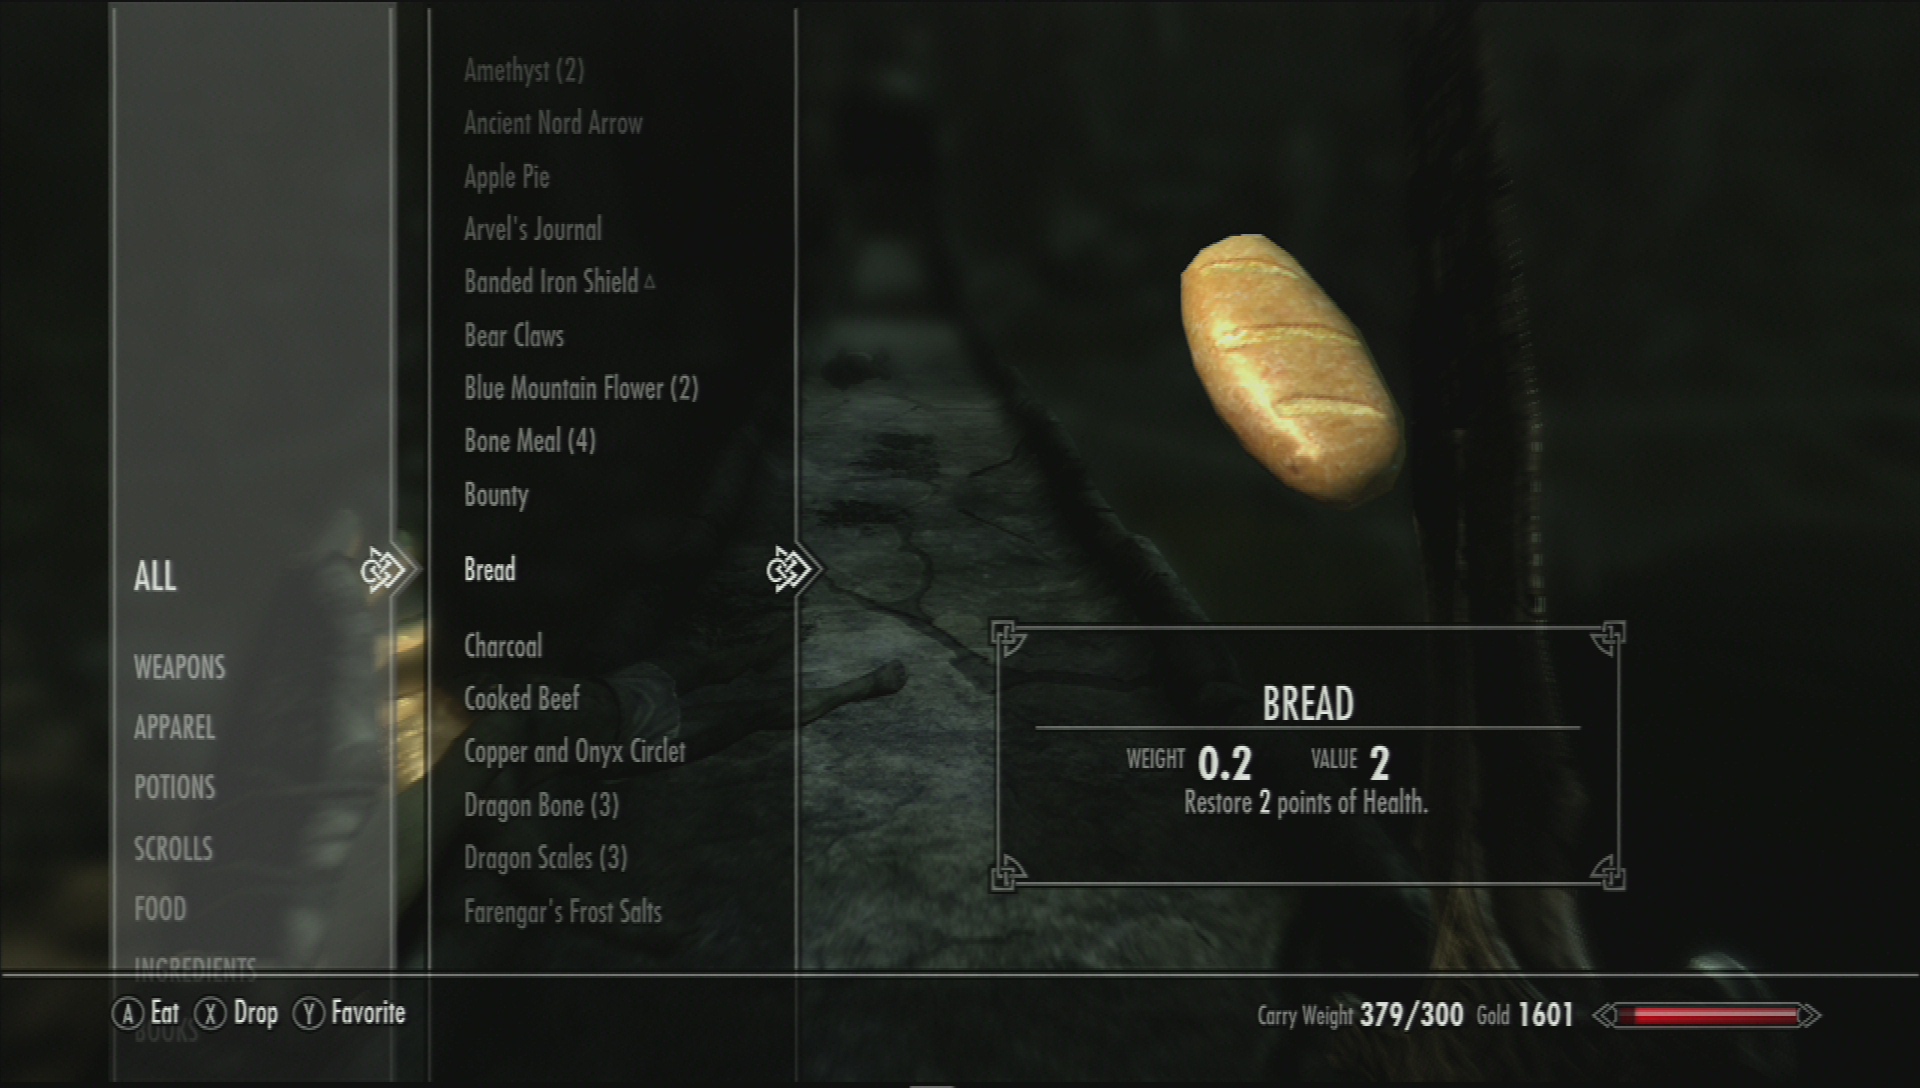 My Skyrim inventory is full, and I can't sort by size.